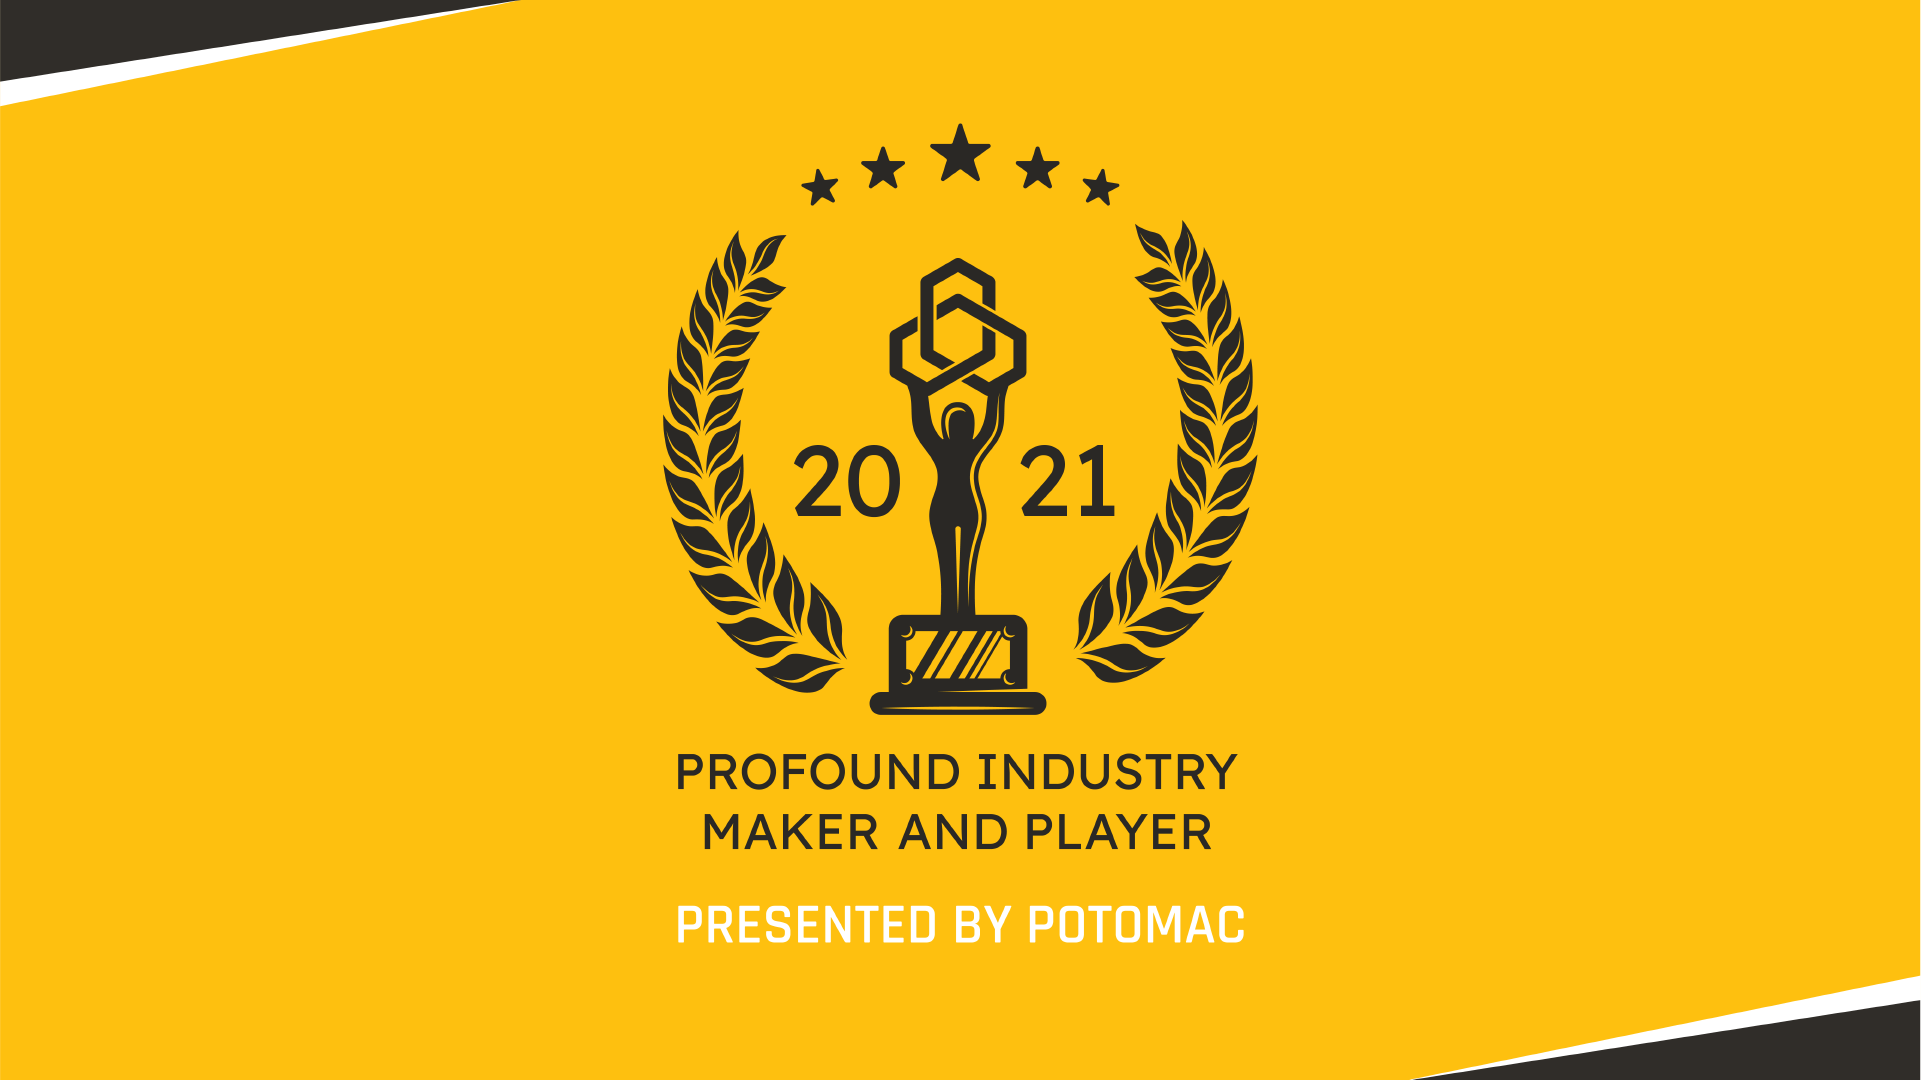 Profound Industry Maker and Player (PIMP) Awards